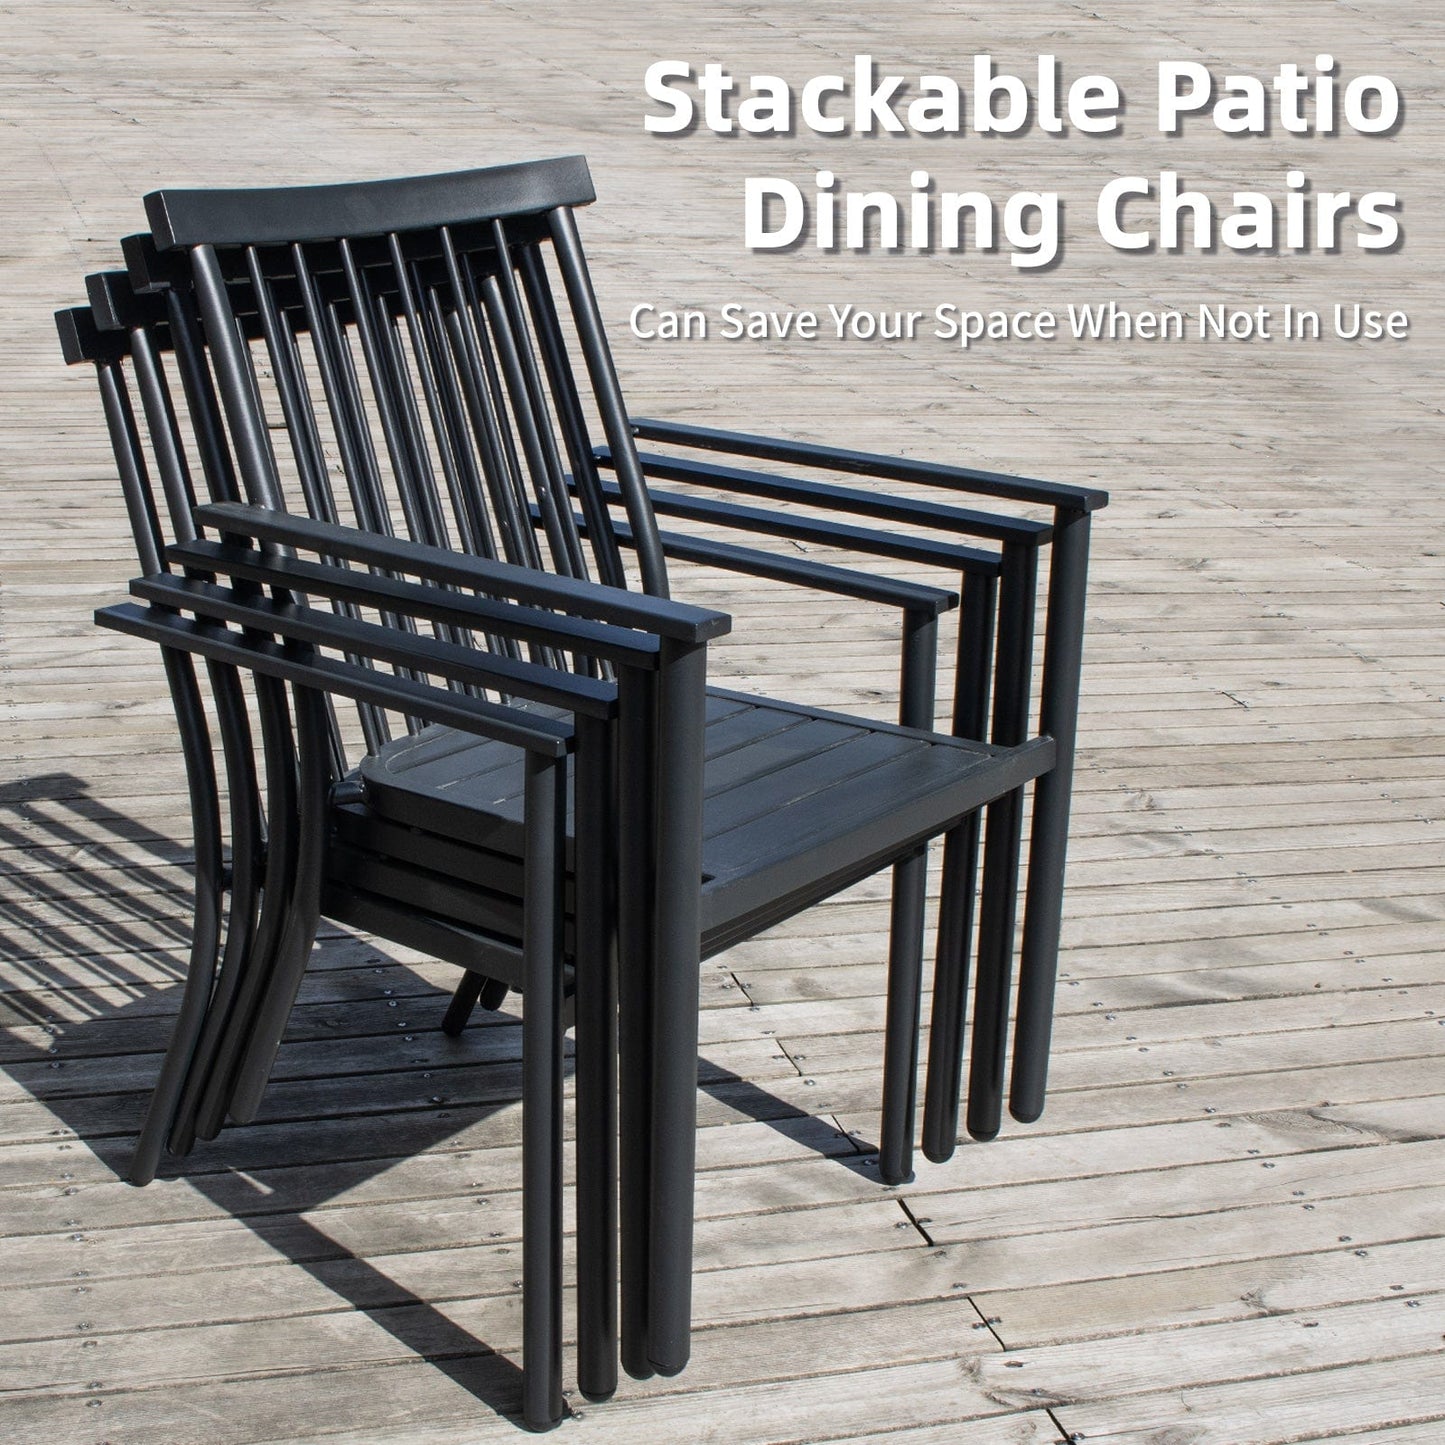 NADADI-Outdoor-Patio-Chairs-2c-stackable-patio-dining-chairs